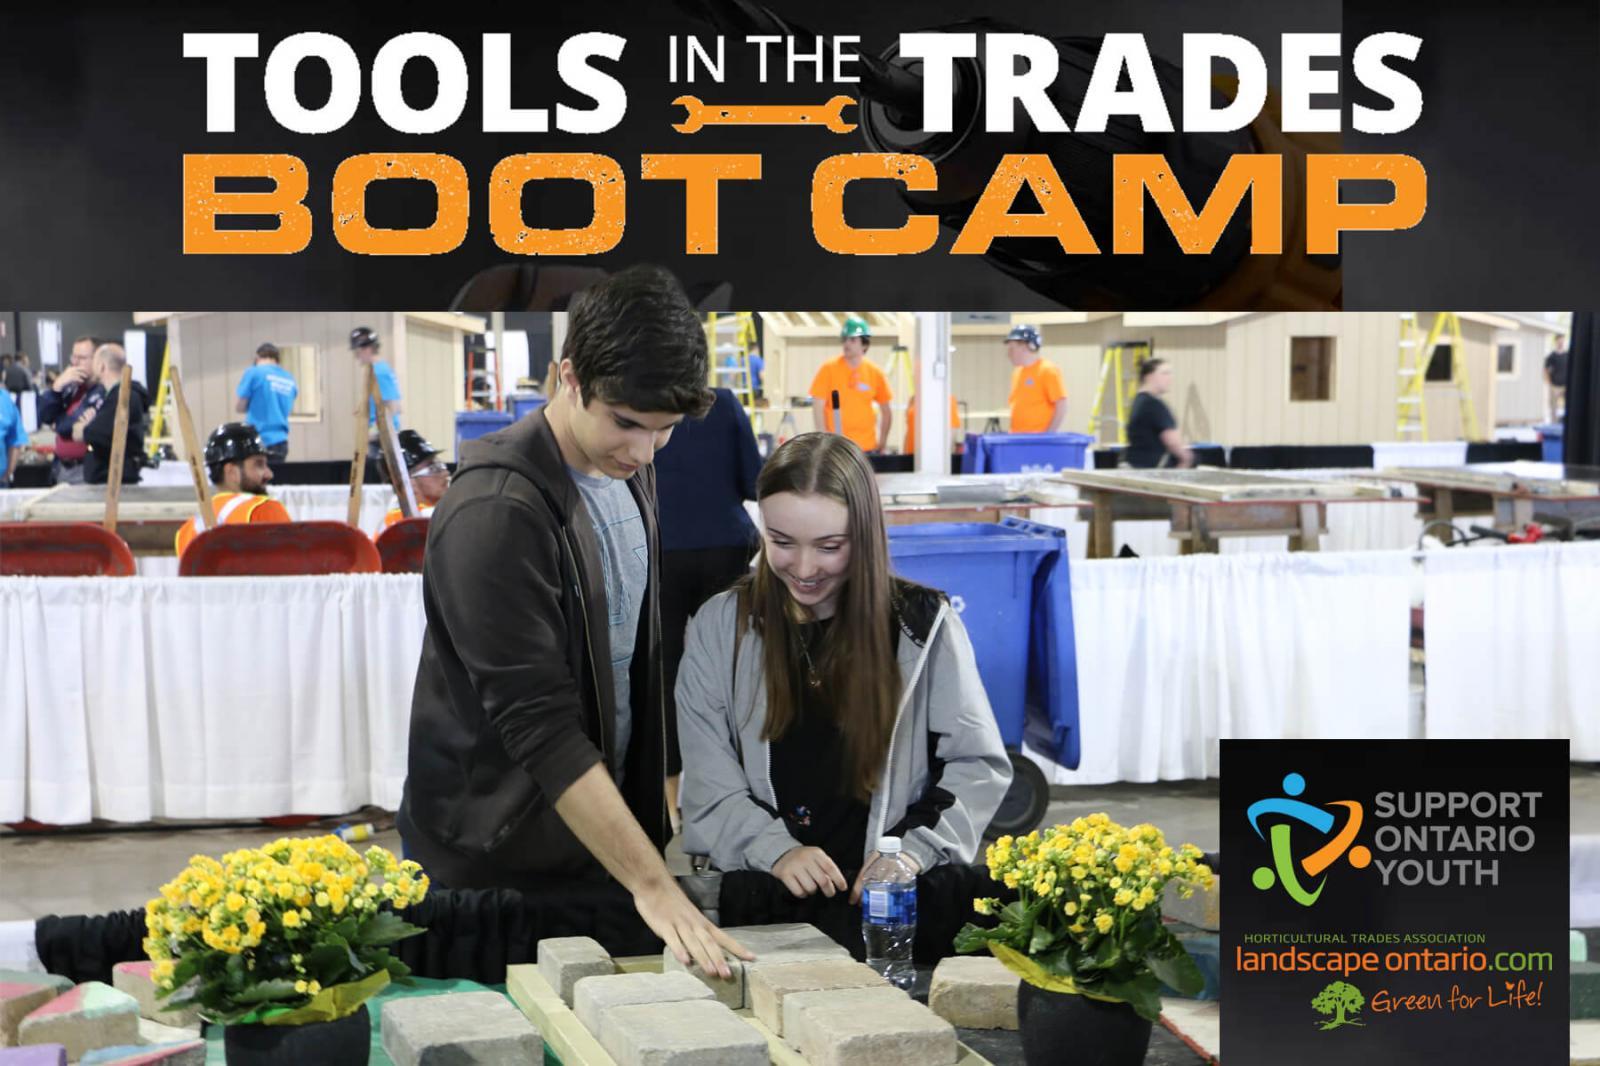 Tools in the Trades Boot Camp events